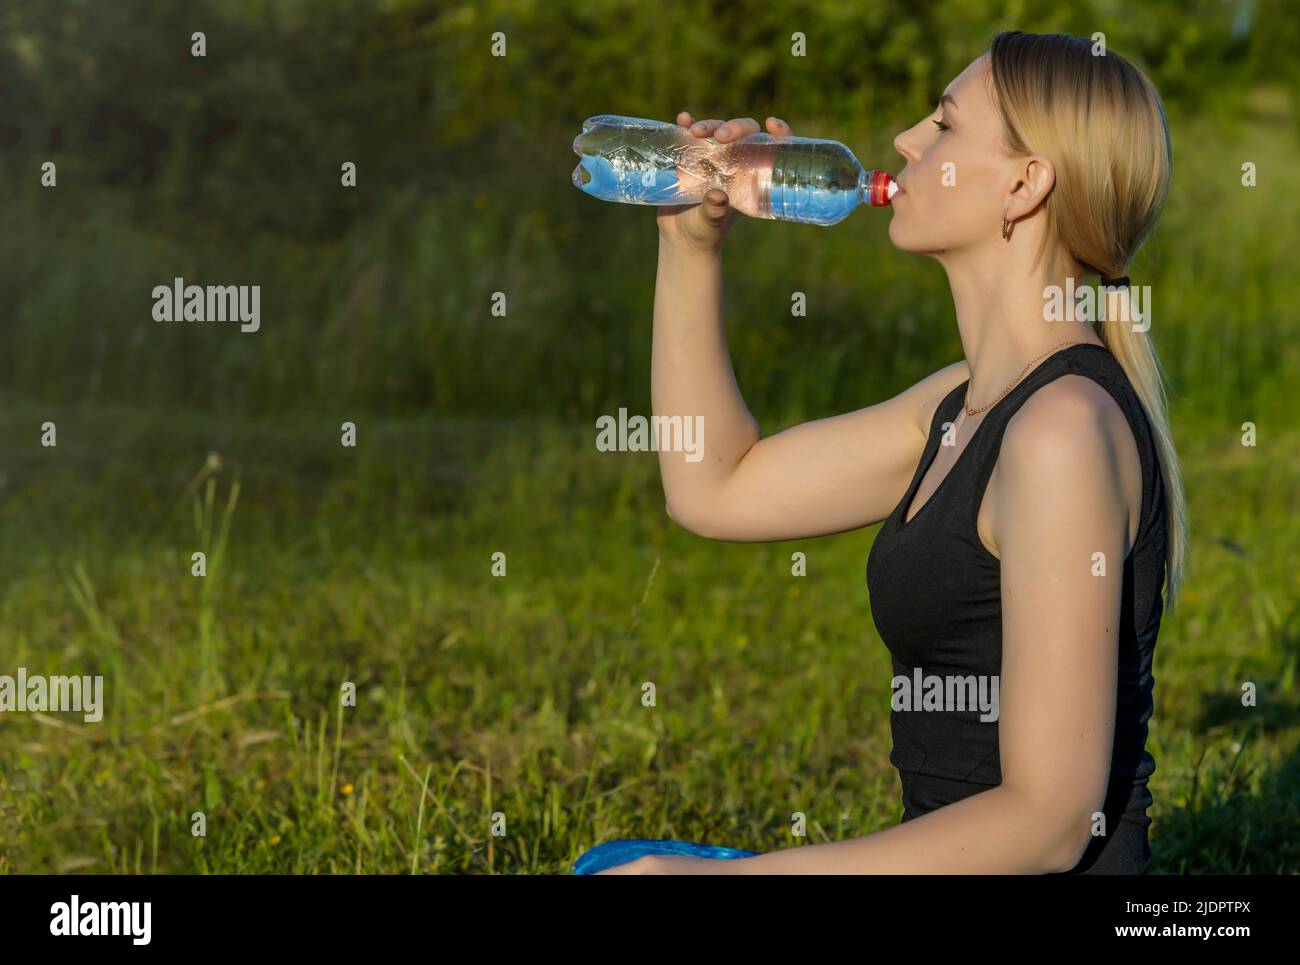 The girl drinks water after a morning workout. Stock Photo